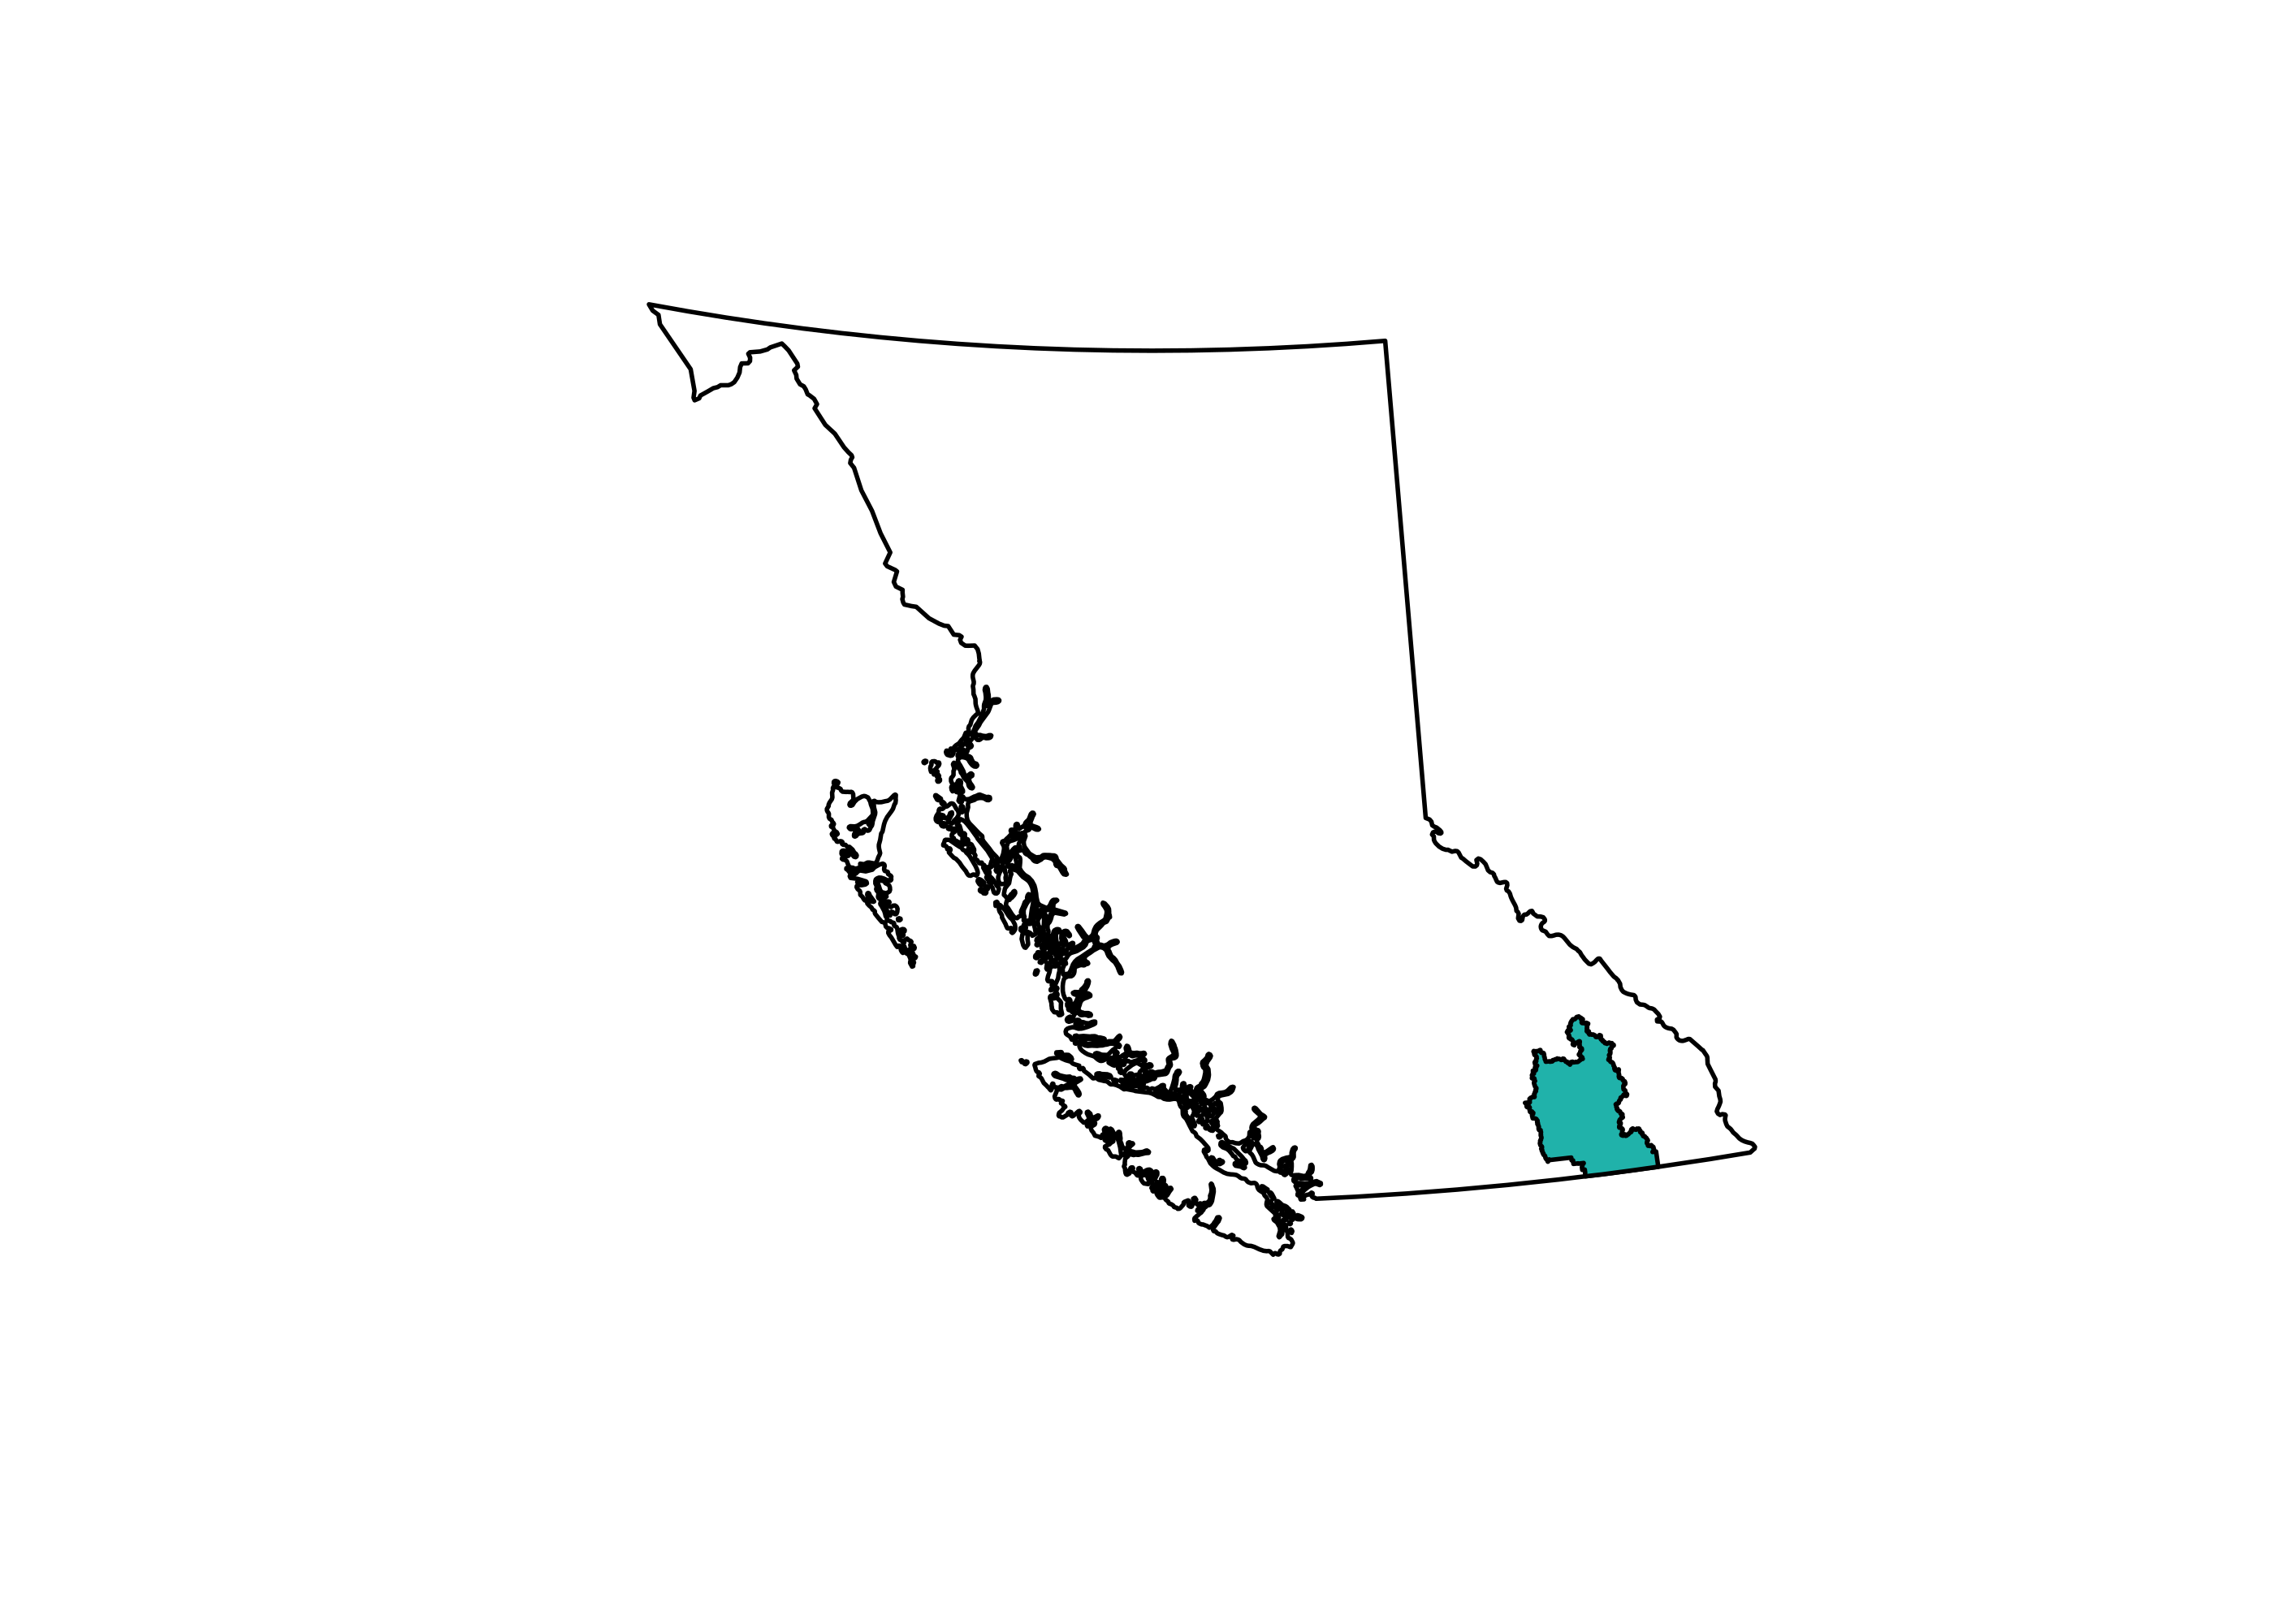 A map of the outline of British Columbia, with the Regional District of Central Kootenay in the Southeastern part of the province shaded in green.